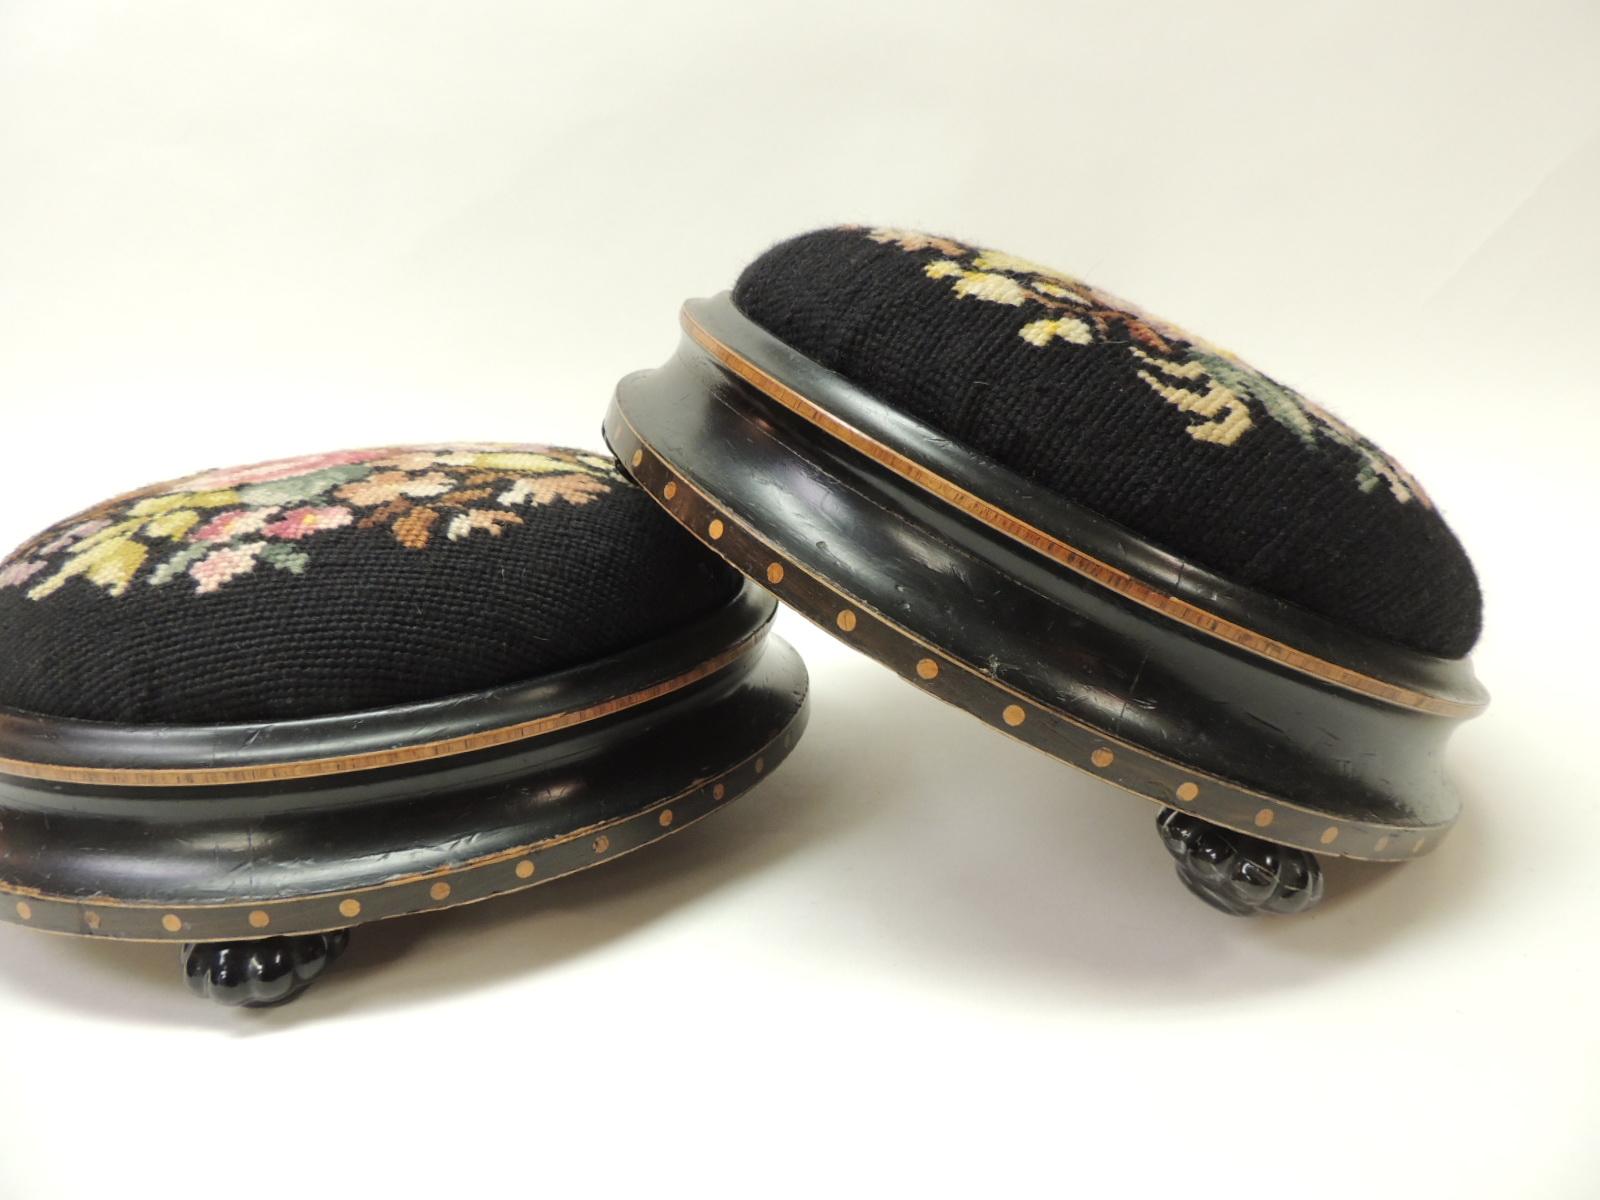 Pair of 19th century English round foot stools
Round foot stools upholstered in a black floral tapestry. The ebonized wood base has inlaid all around.
Black glass feet in the shape of a flower
Size: 12 D x 4.5 H.
 